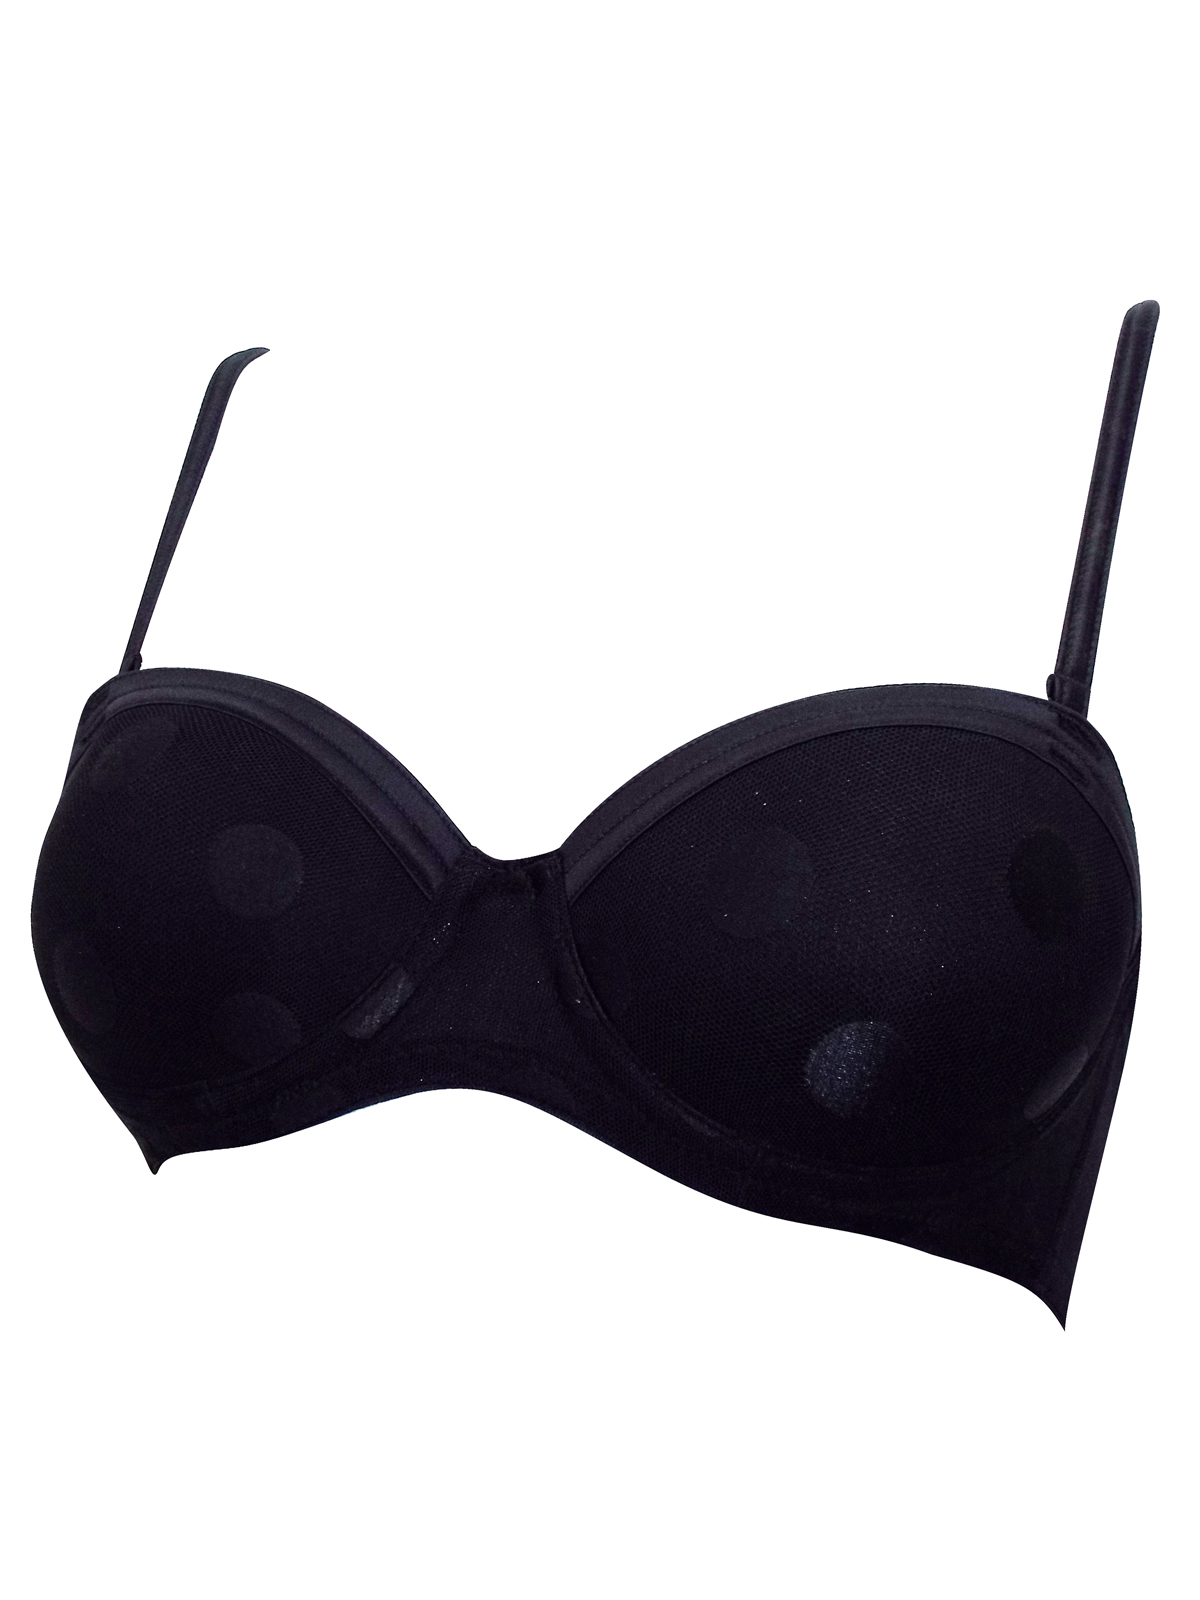 Marks and Spencer - - M&5 BLACK Padded Multiway Bra - Size 32 to 40 (B cup)